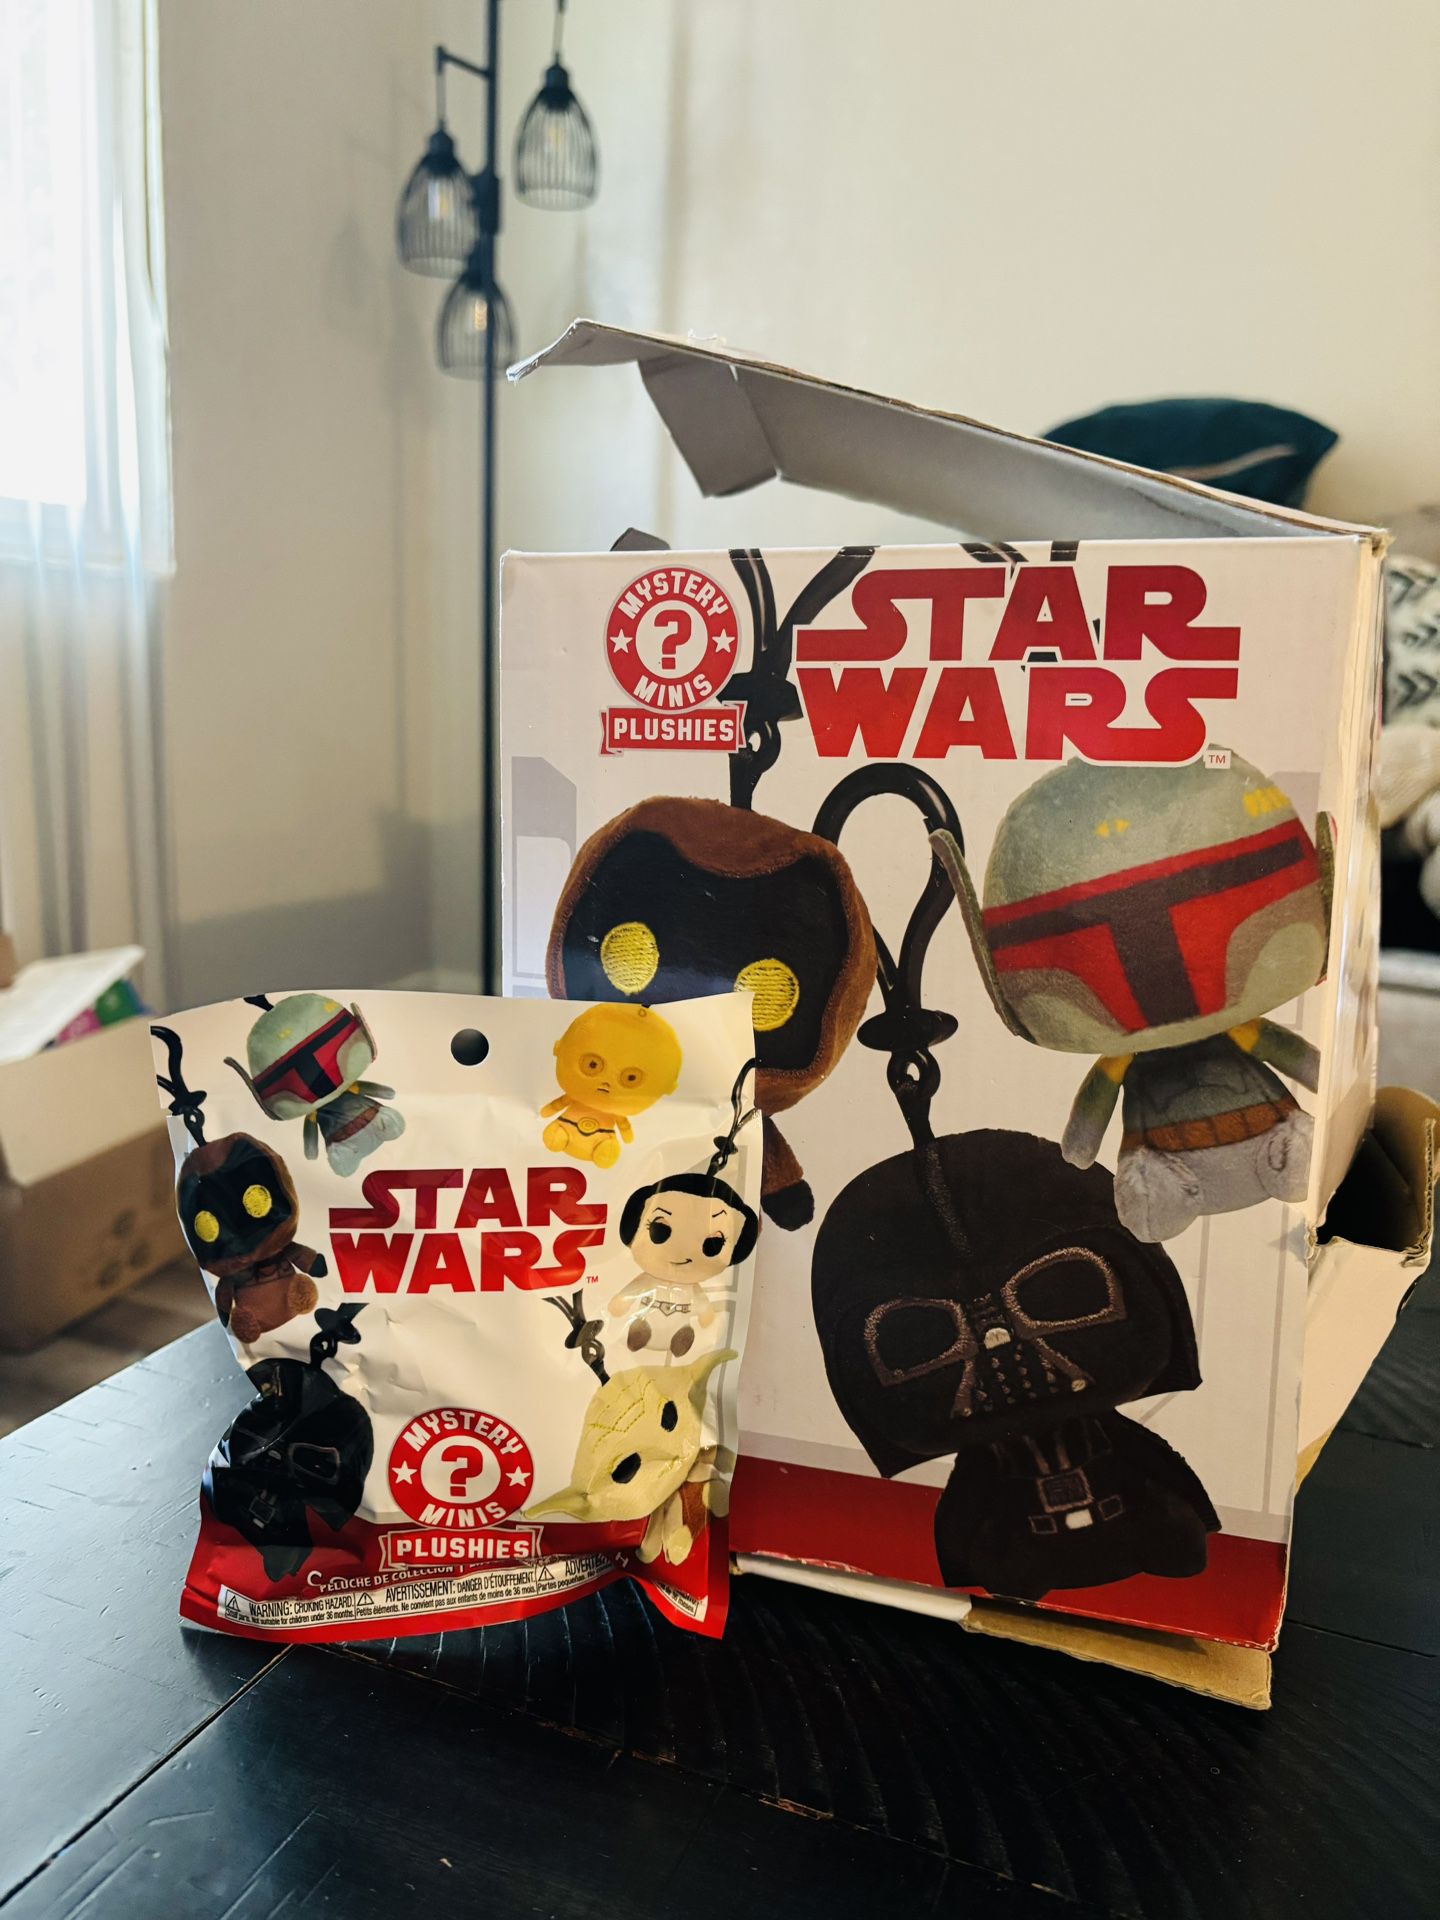 14 Star Wars Mystery plushies 